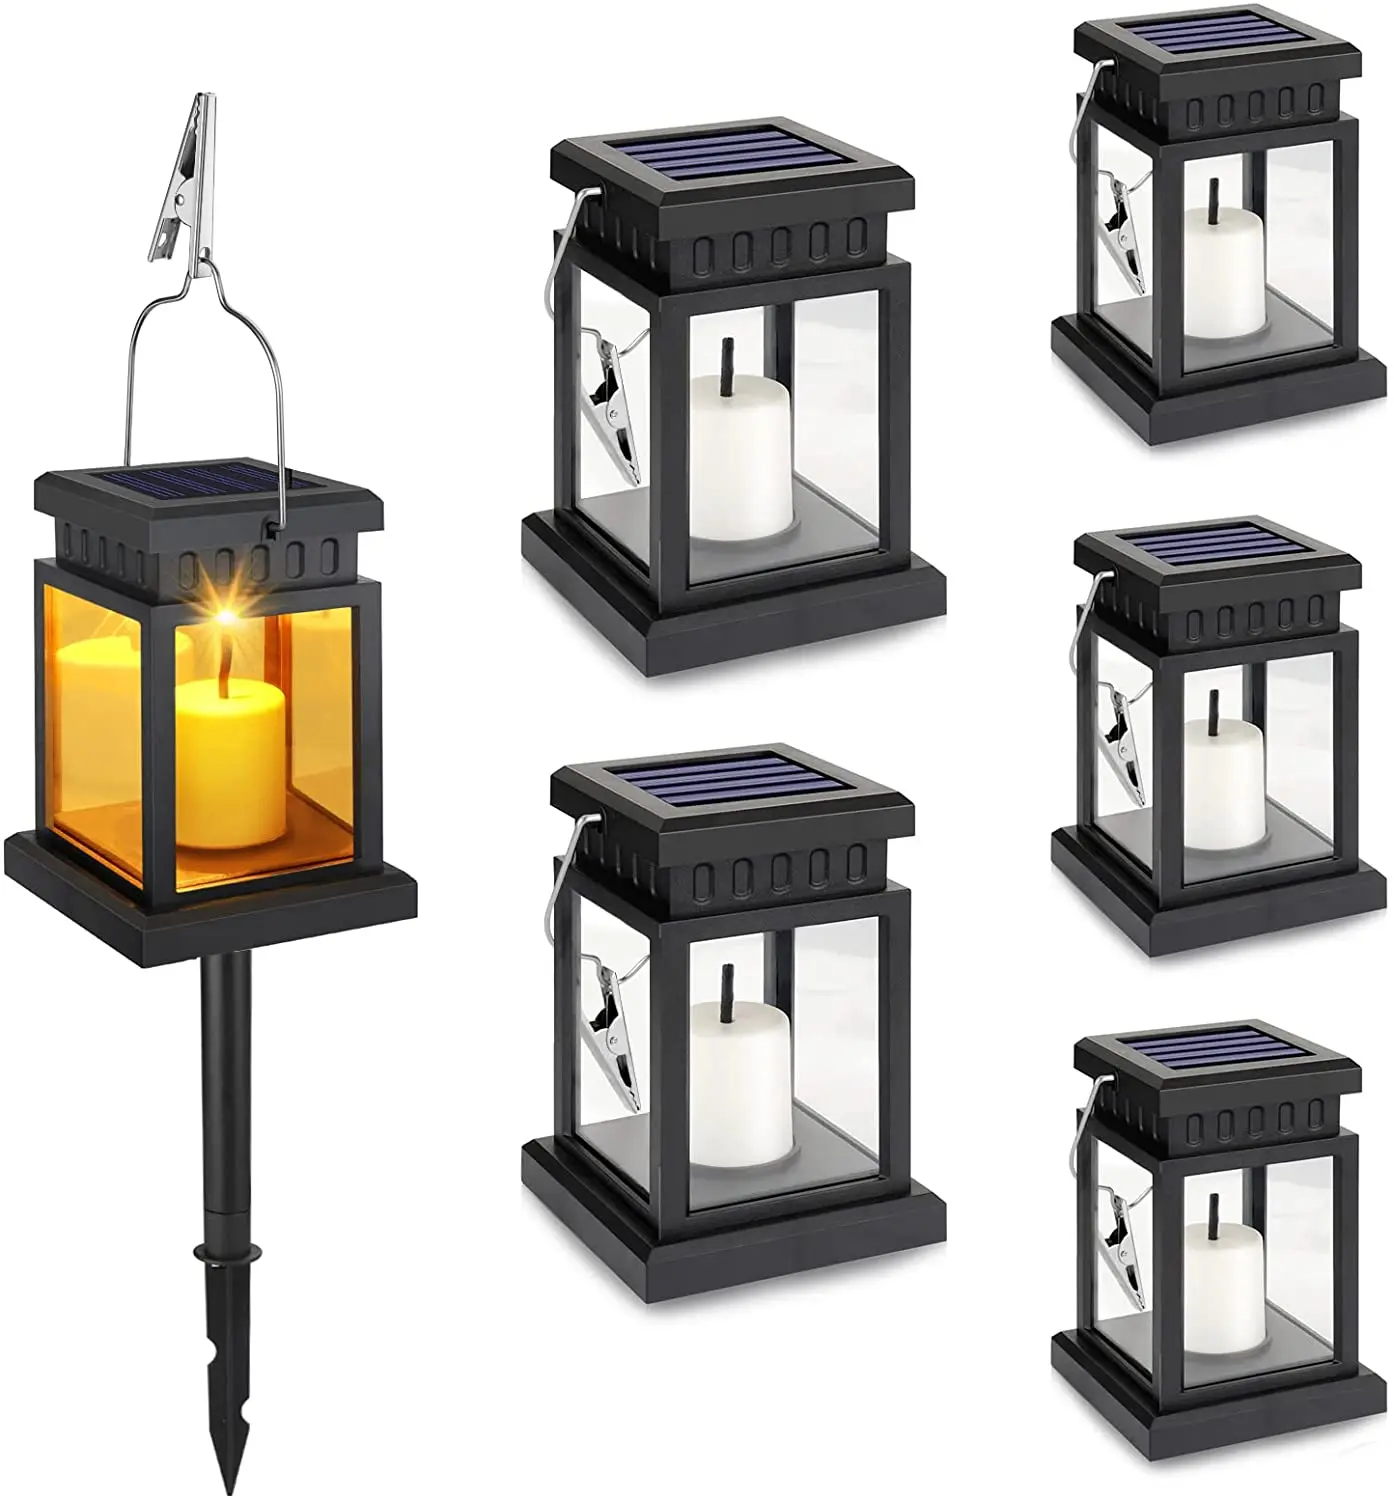 6Pack Solar Hanging Lanterns Outdoor Candle Effect Light with Stake for Garden Patio Lawn Deck Umbrella Tent Tree Yard